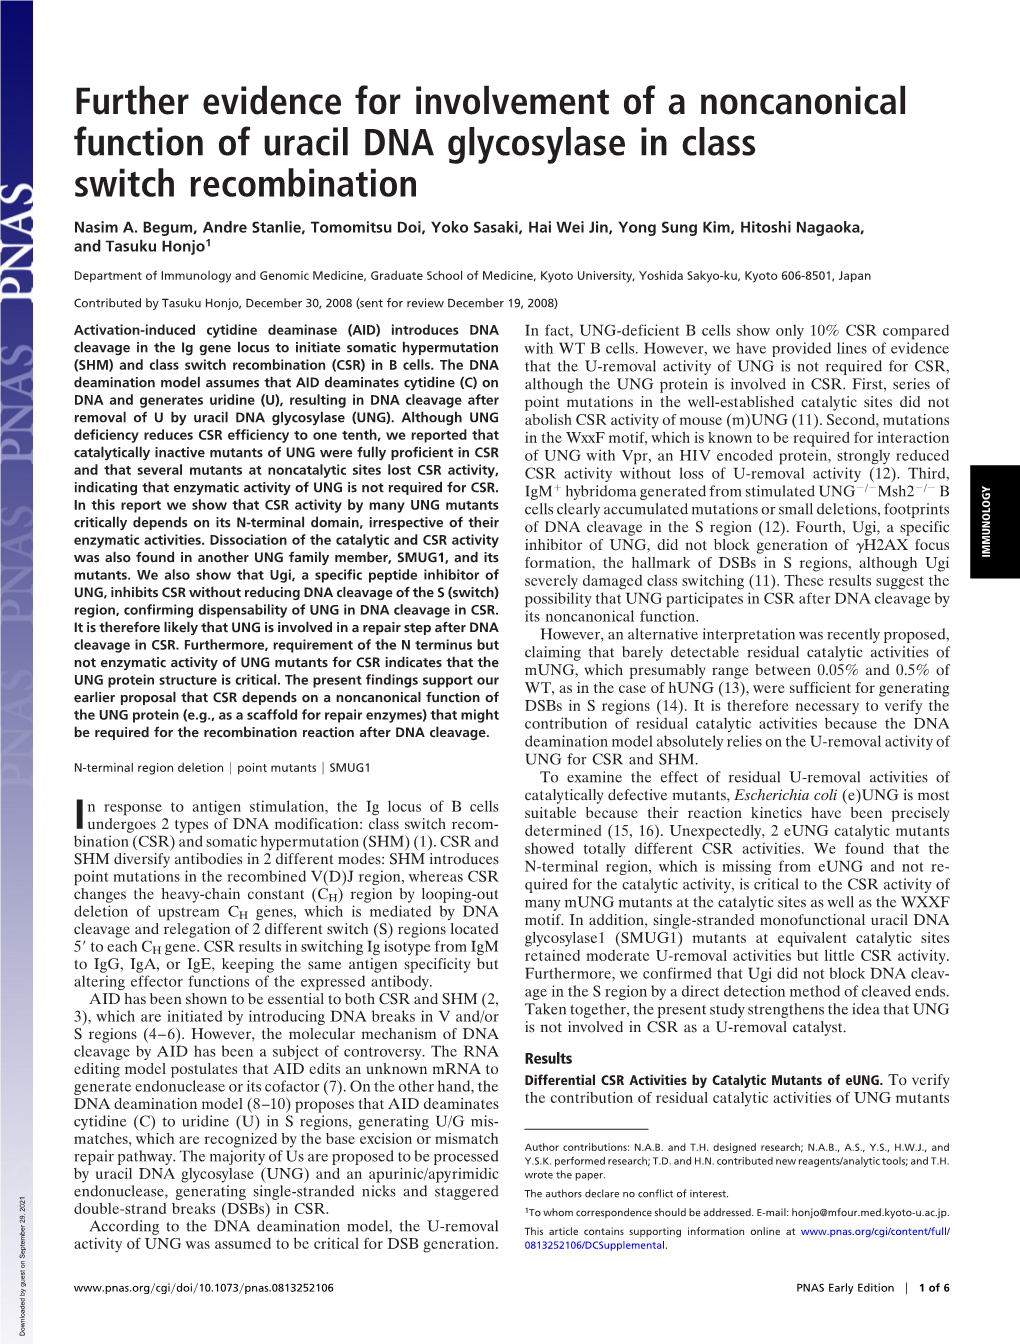 Further Evidence for Involvement of a Noncanonical Function of Uracil DNA Glycosylase in Class Switch Recombination